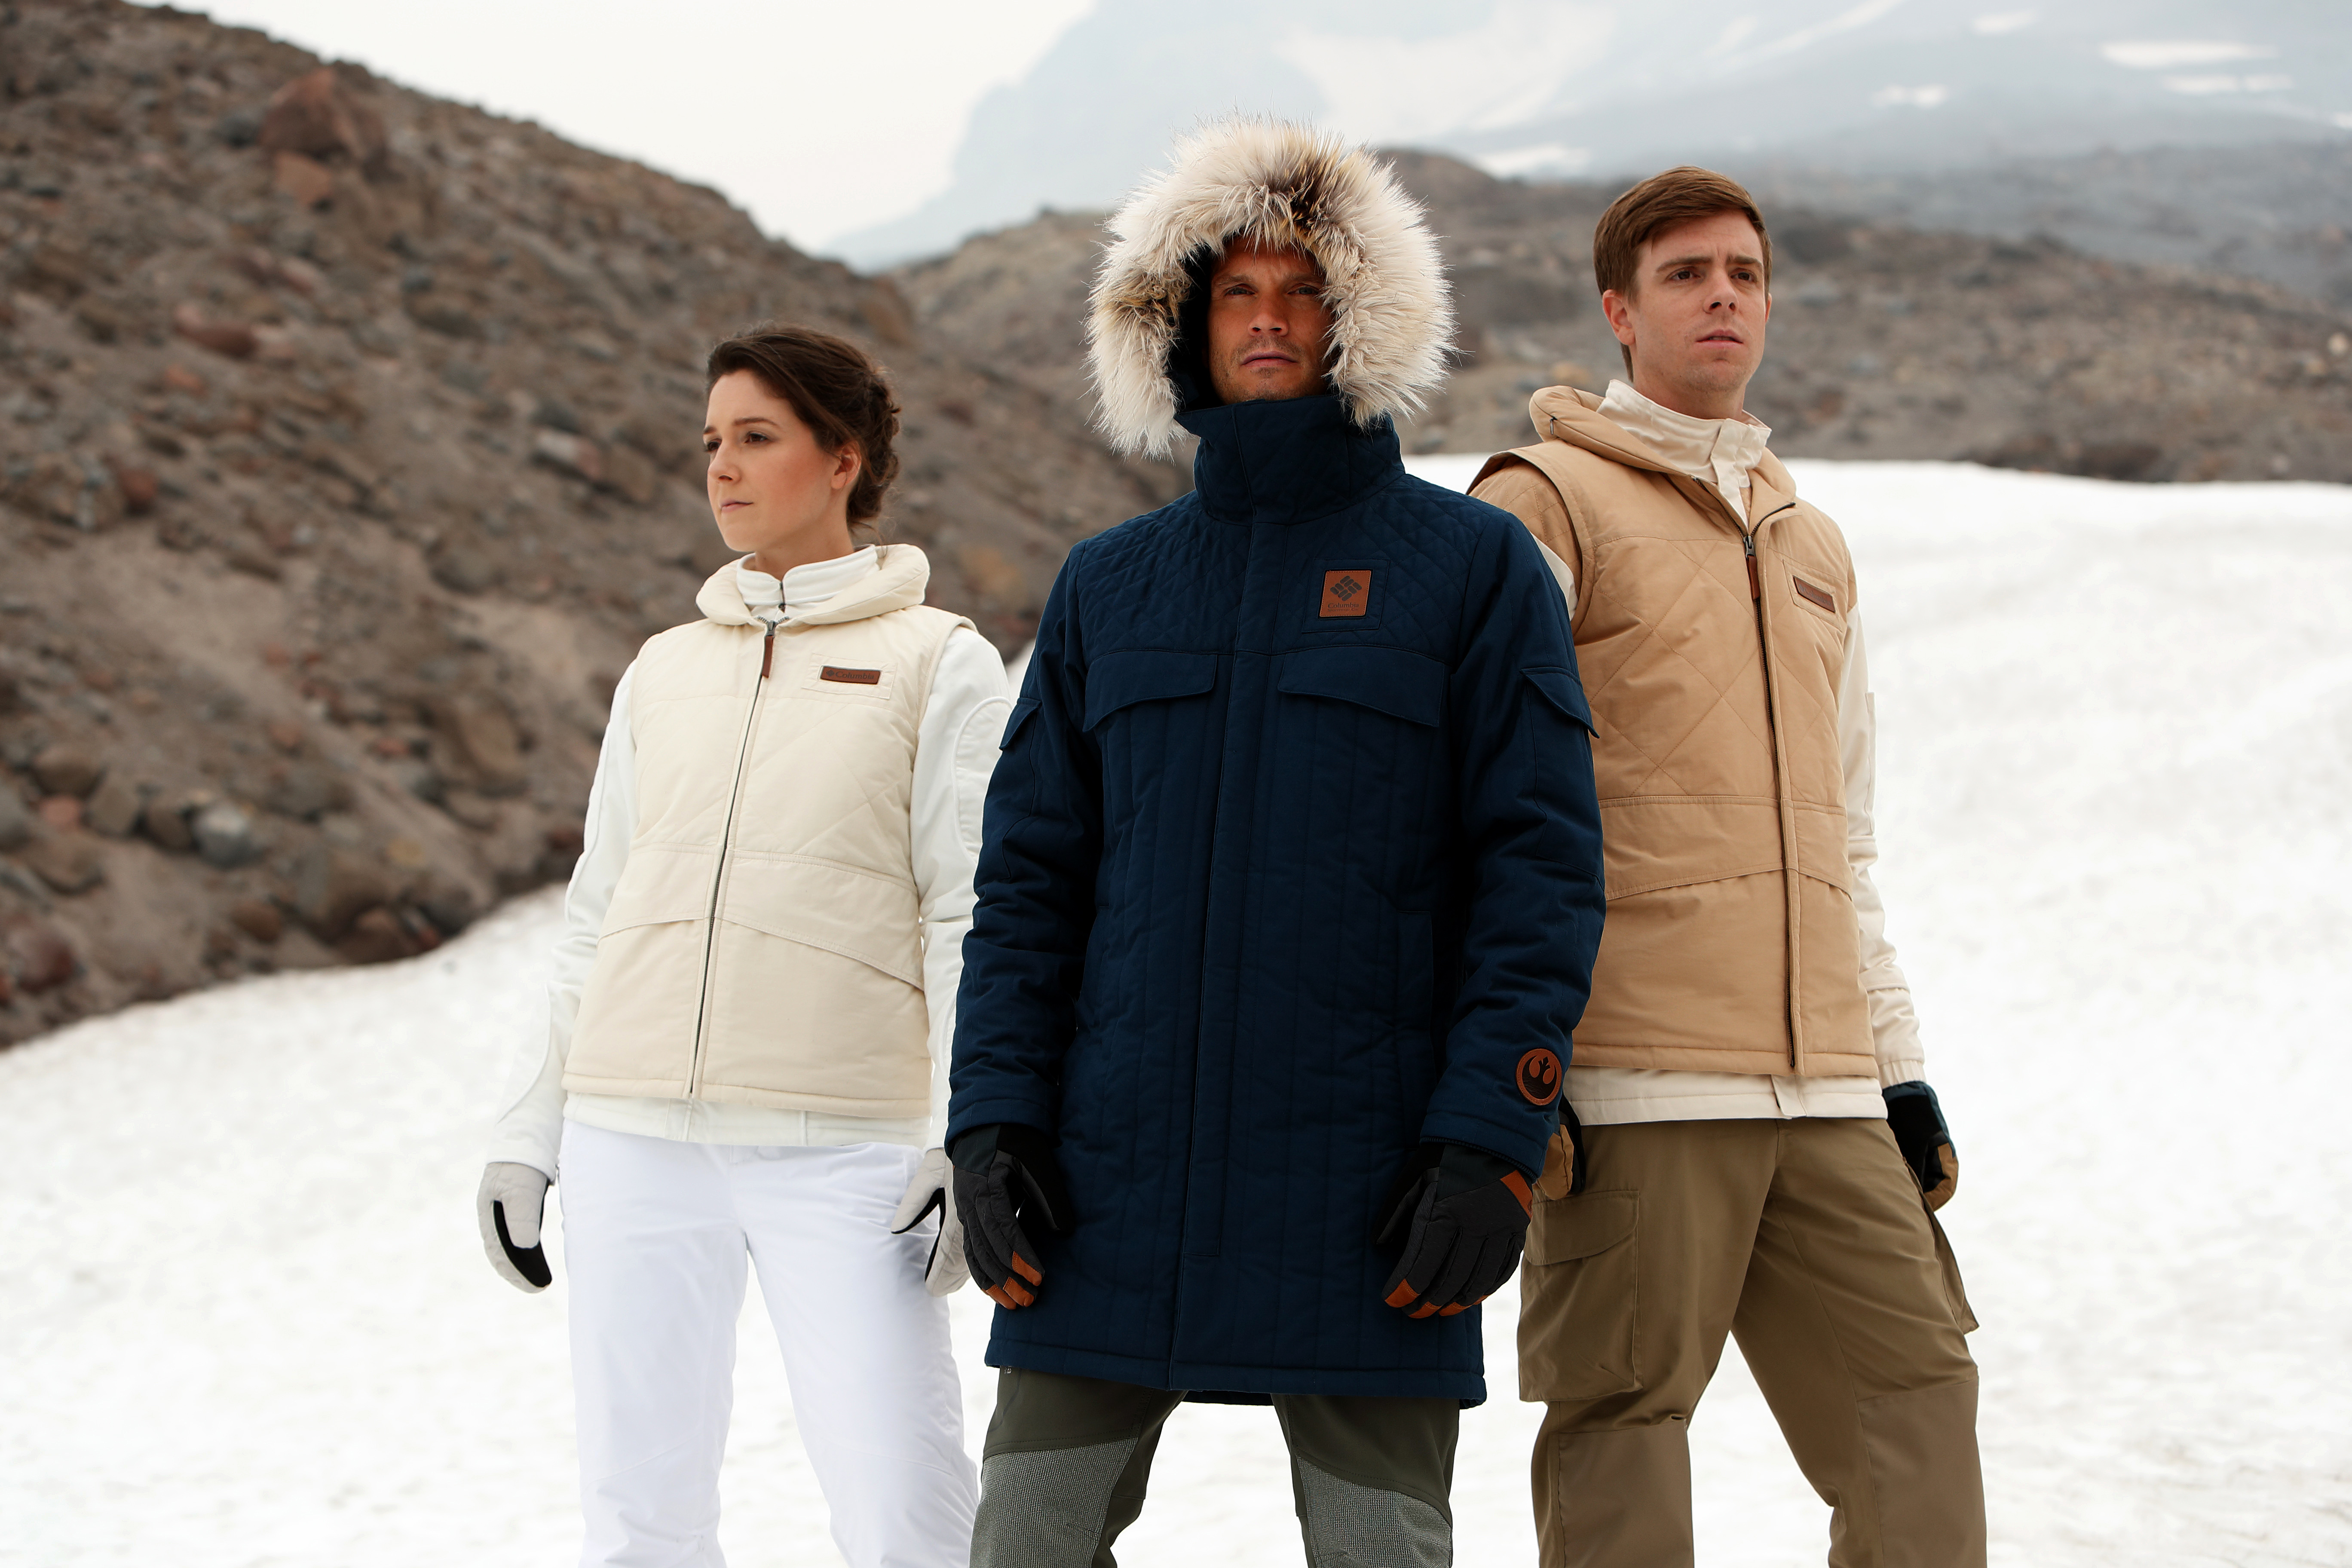 Columbia Sportswear Launches Collection Inspired by Star Wars: The Empire Strikes Back